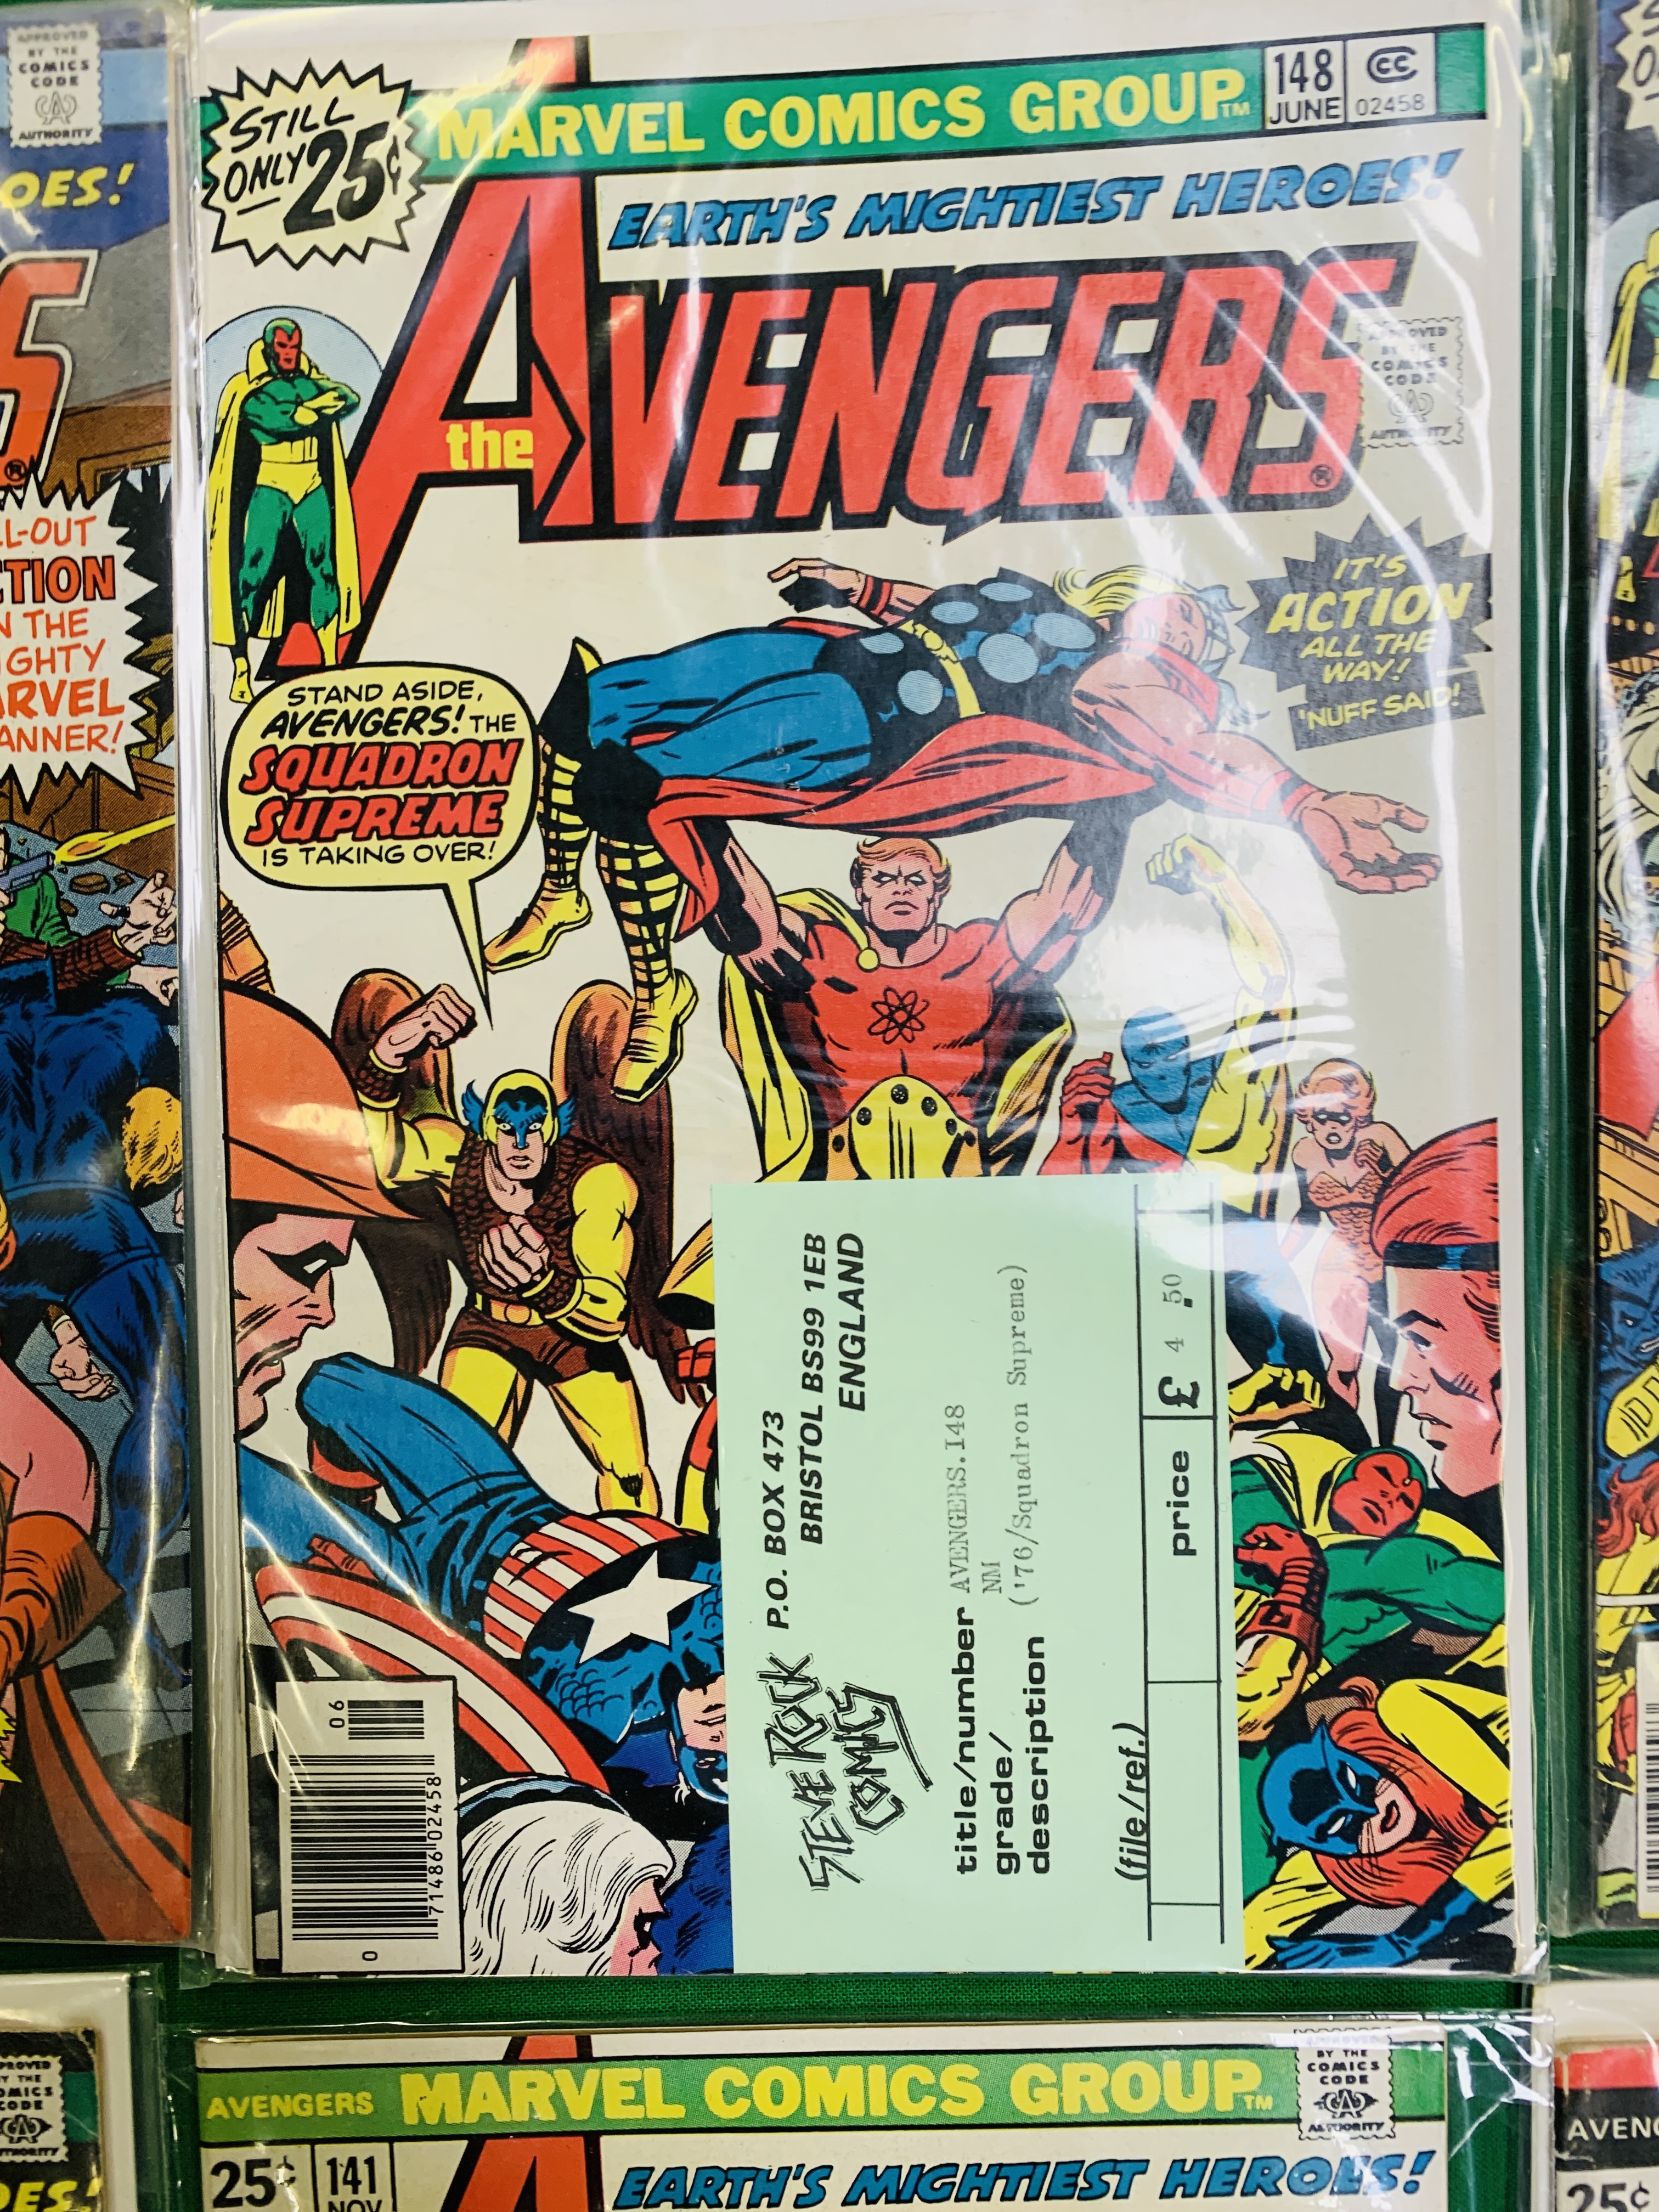 MARVEL COMICS THE AVENGERS NO. 101 - 299, MISSING ISSUES 103 AND 110. - Image 34 of 130